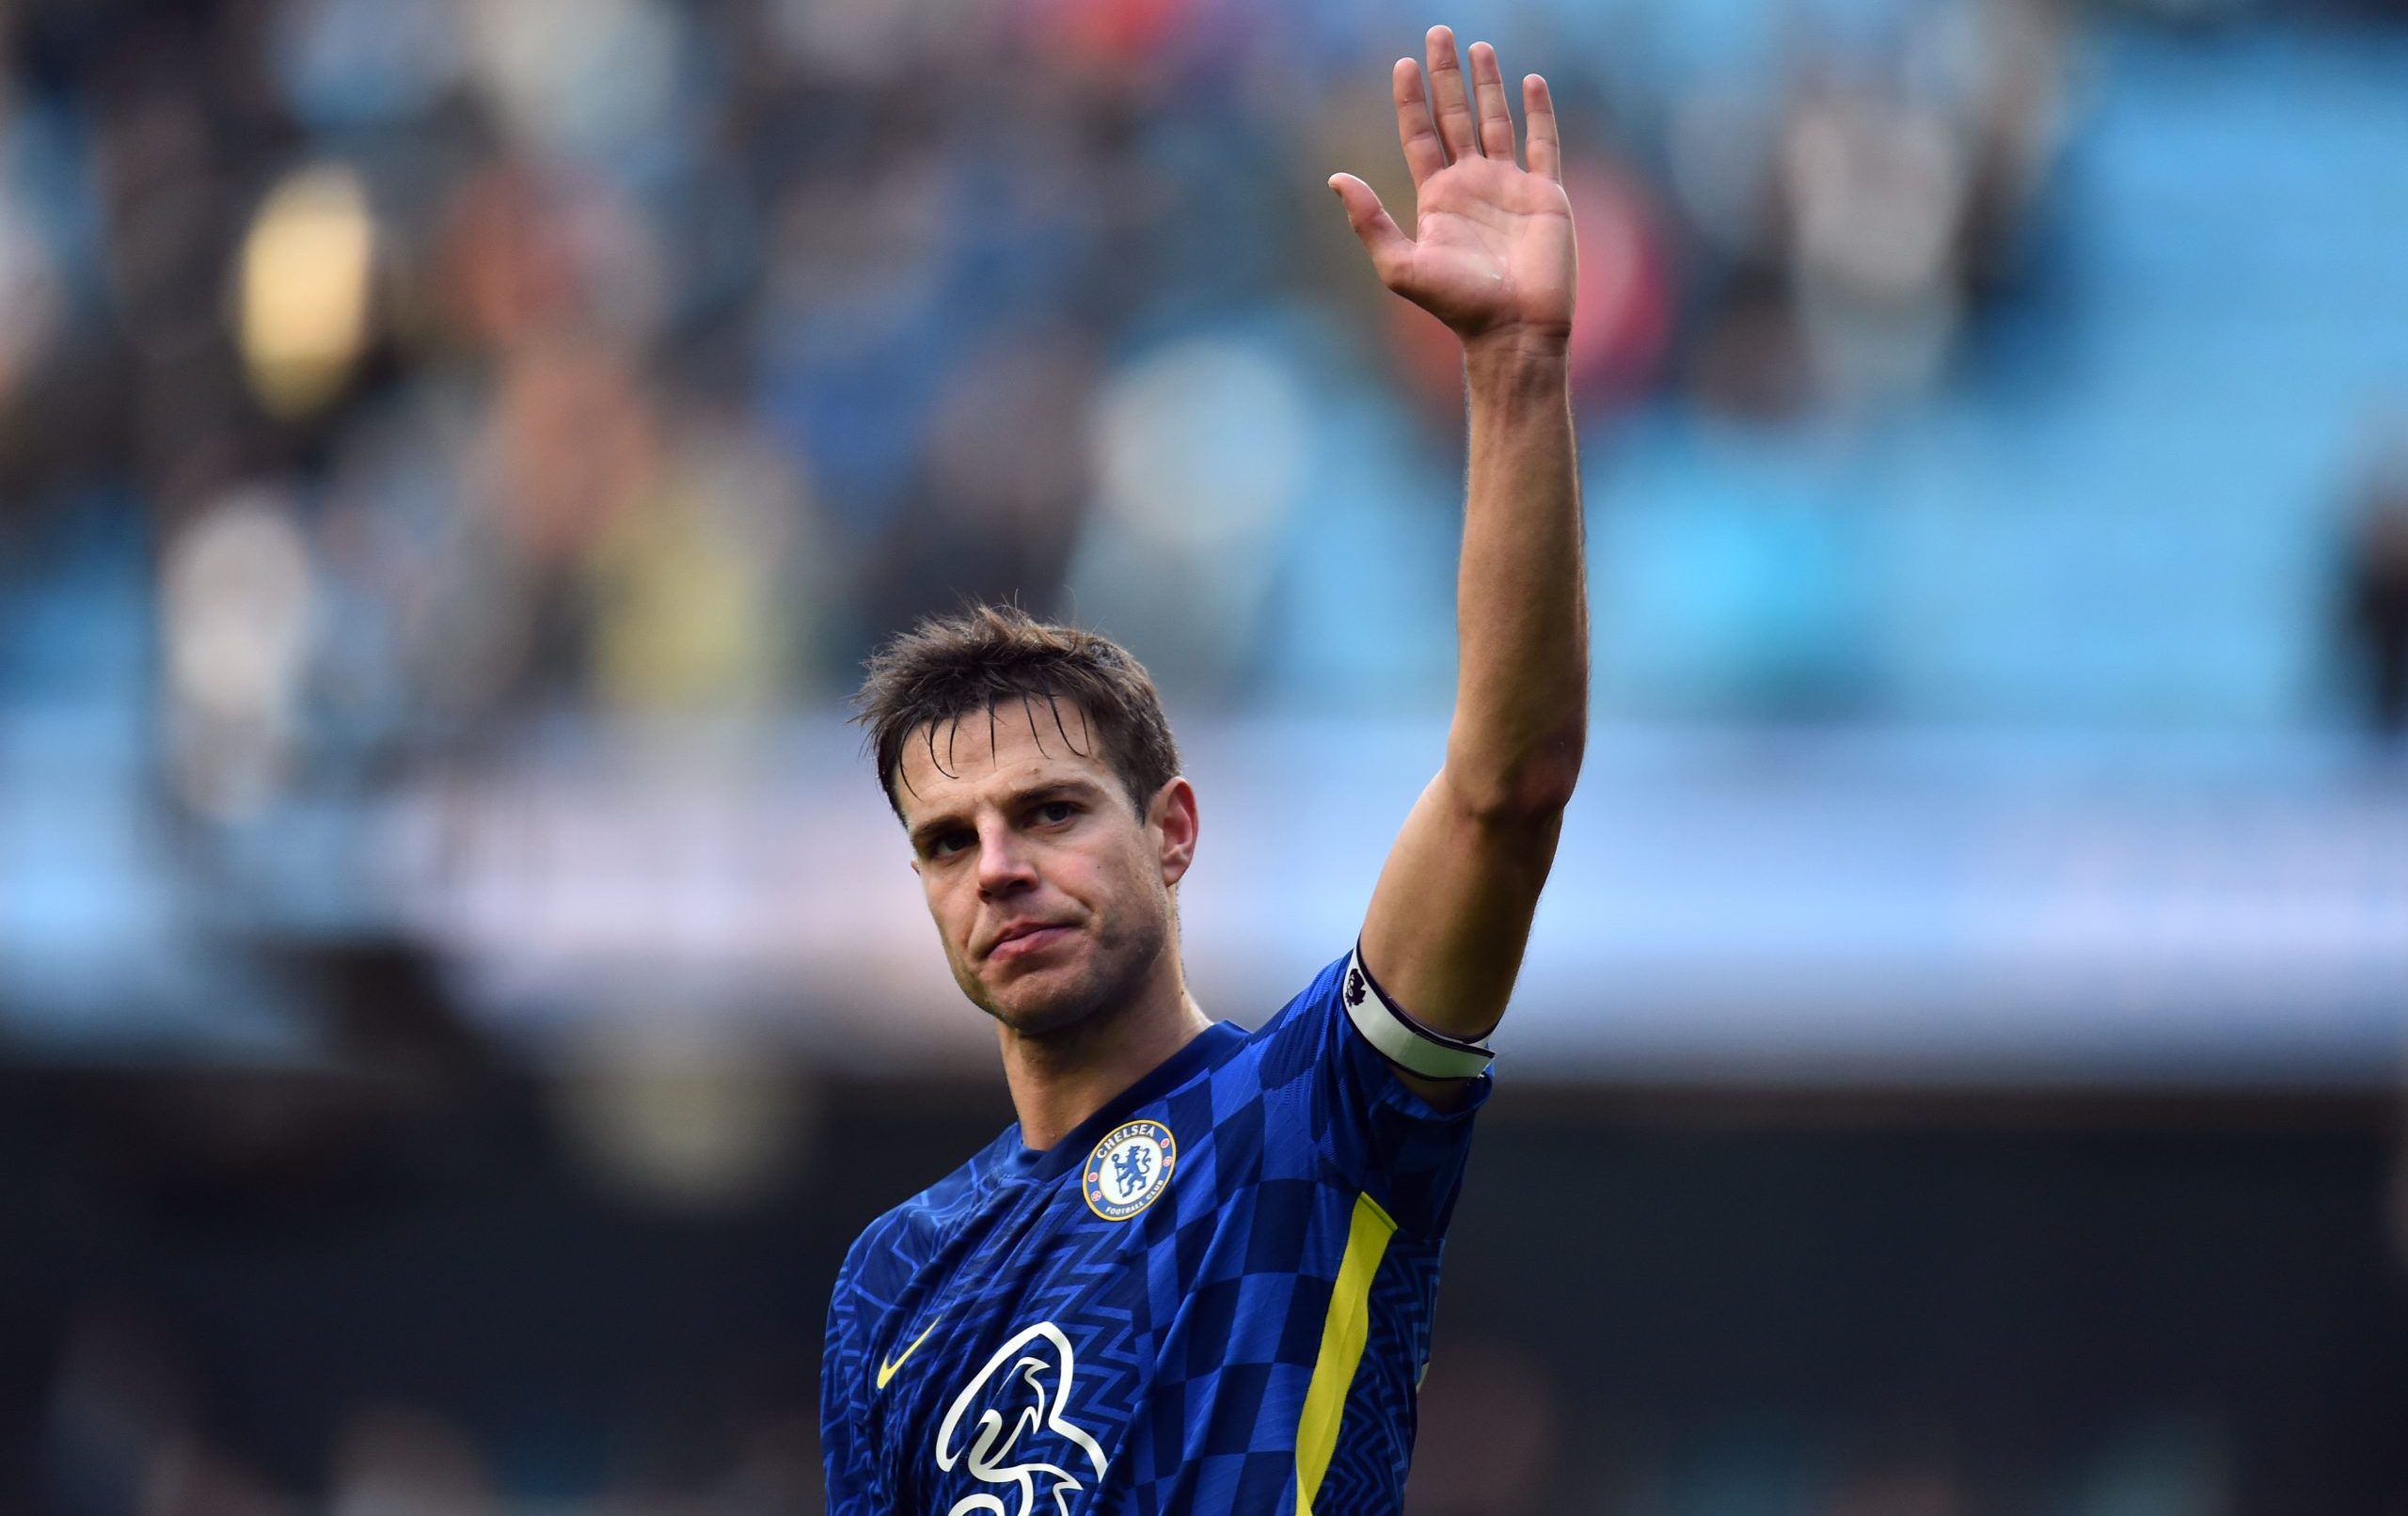 Chelsea-captain-Cesar-Azpilicueta-waving-to-supporters-scaled.jpg